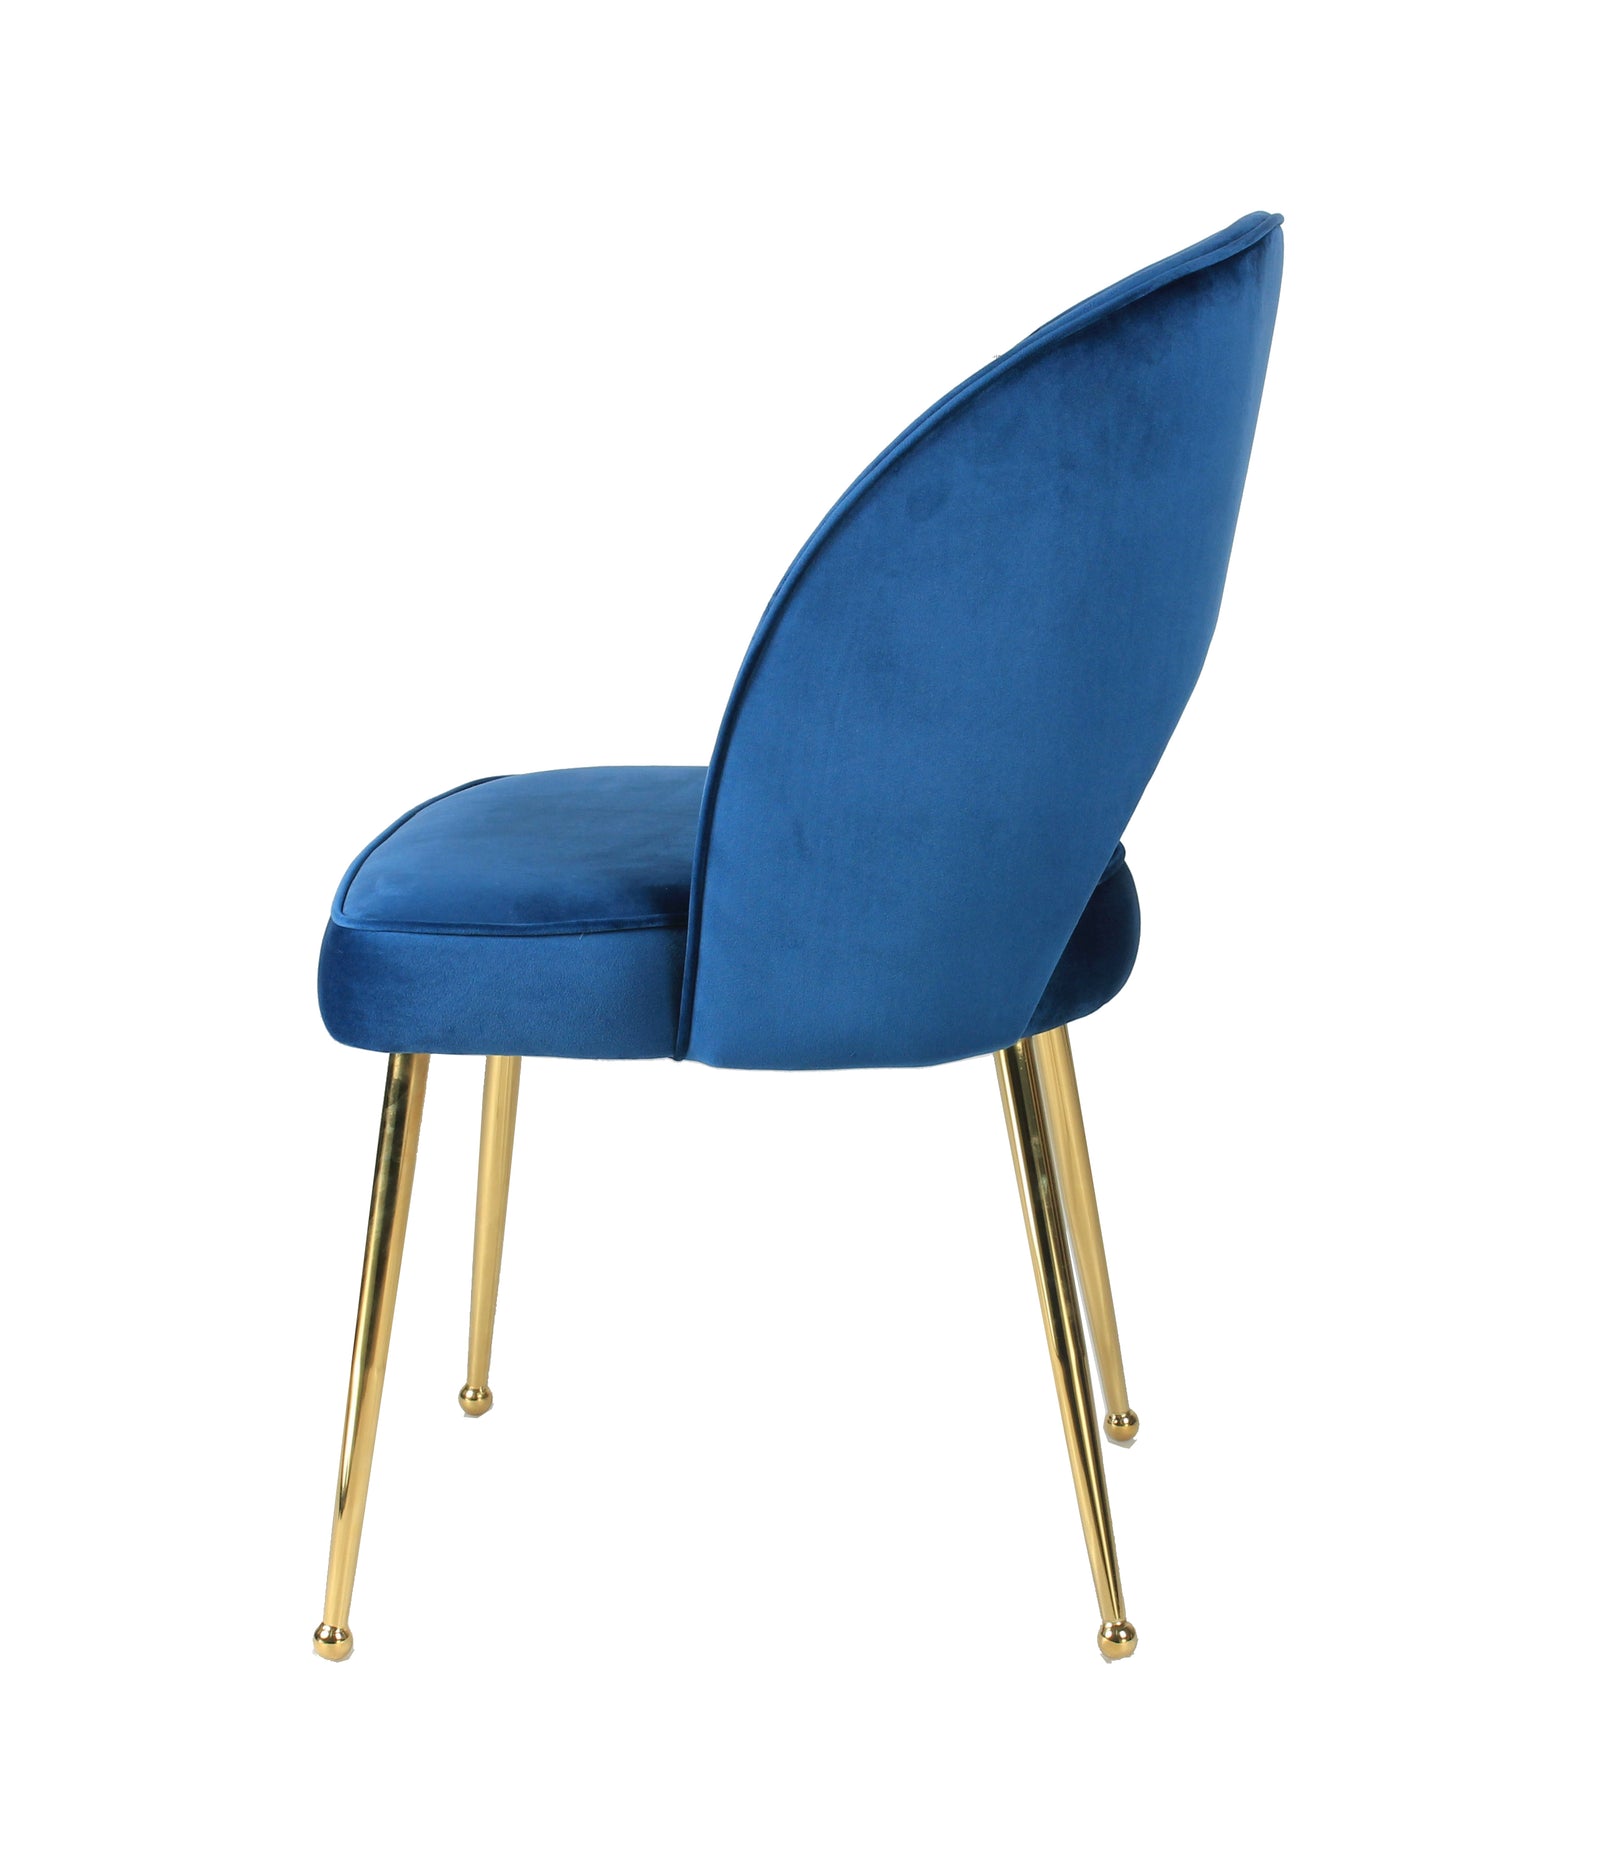 Set of 2 Royal Blue Accent Chairs